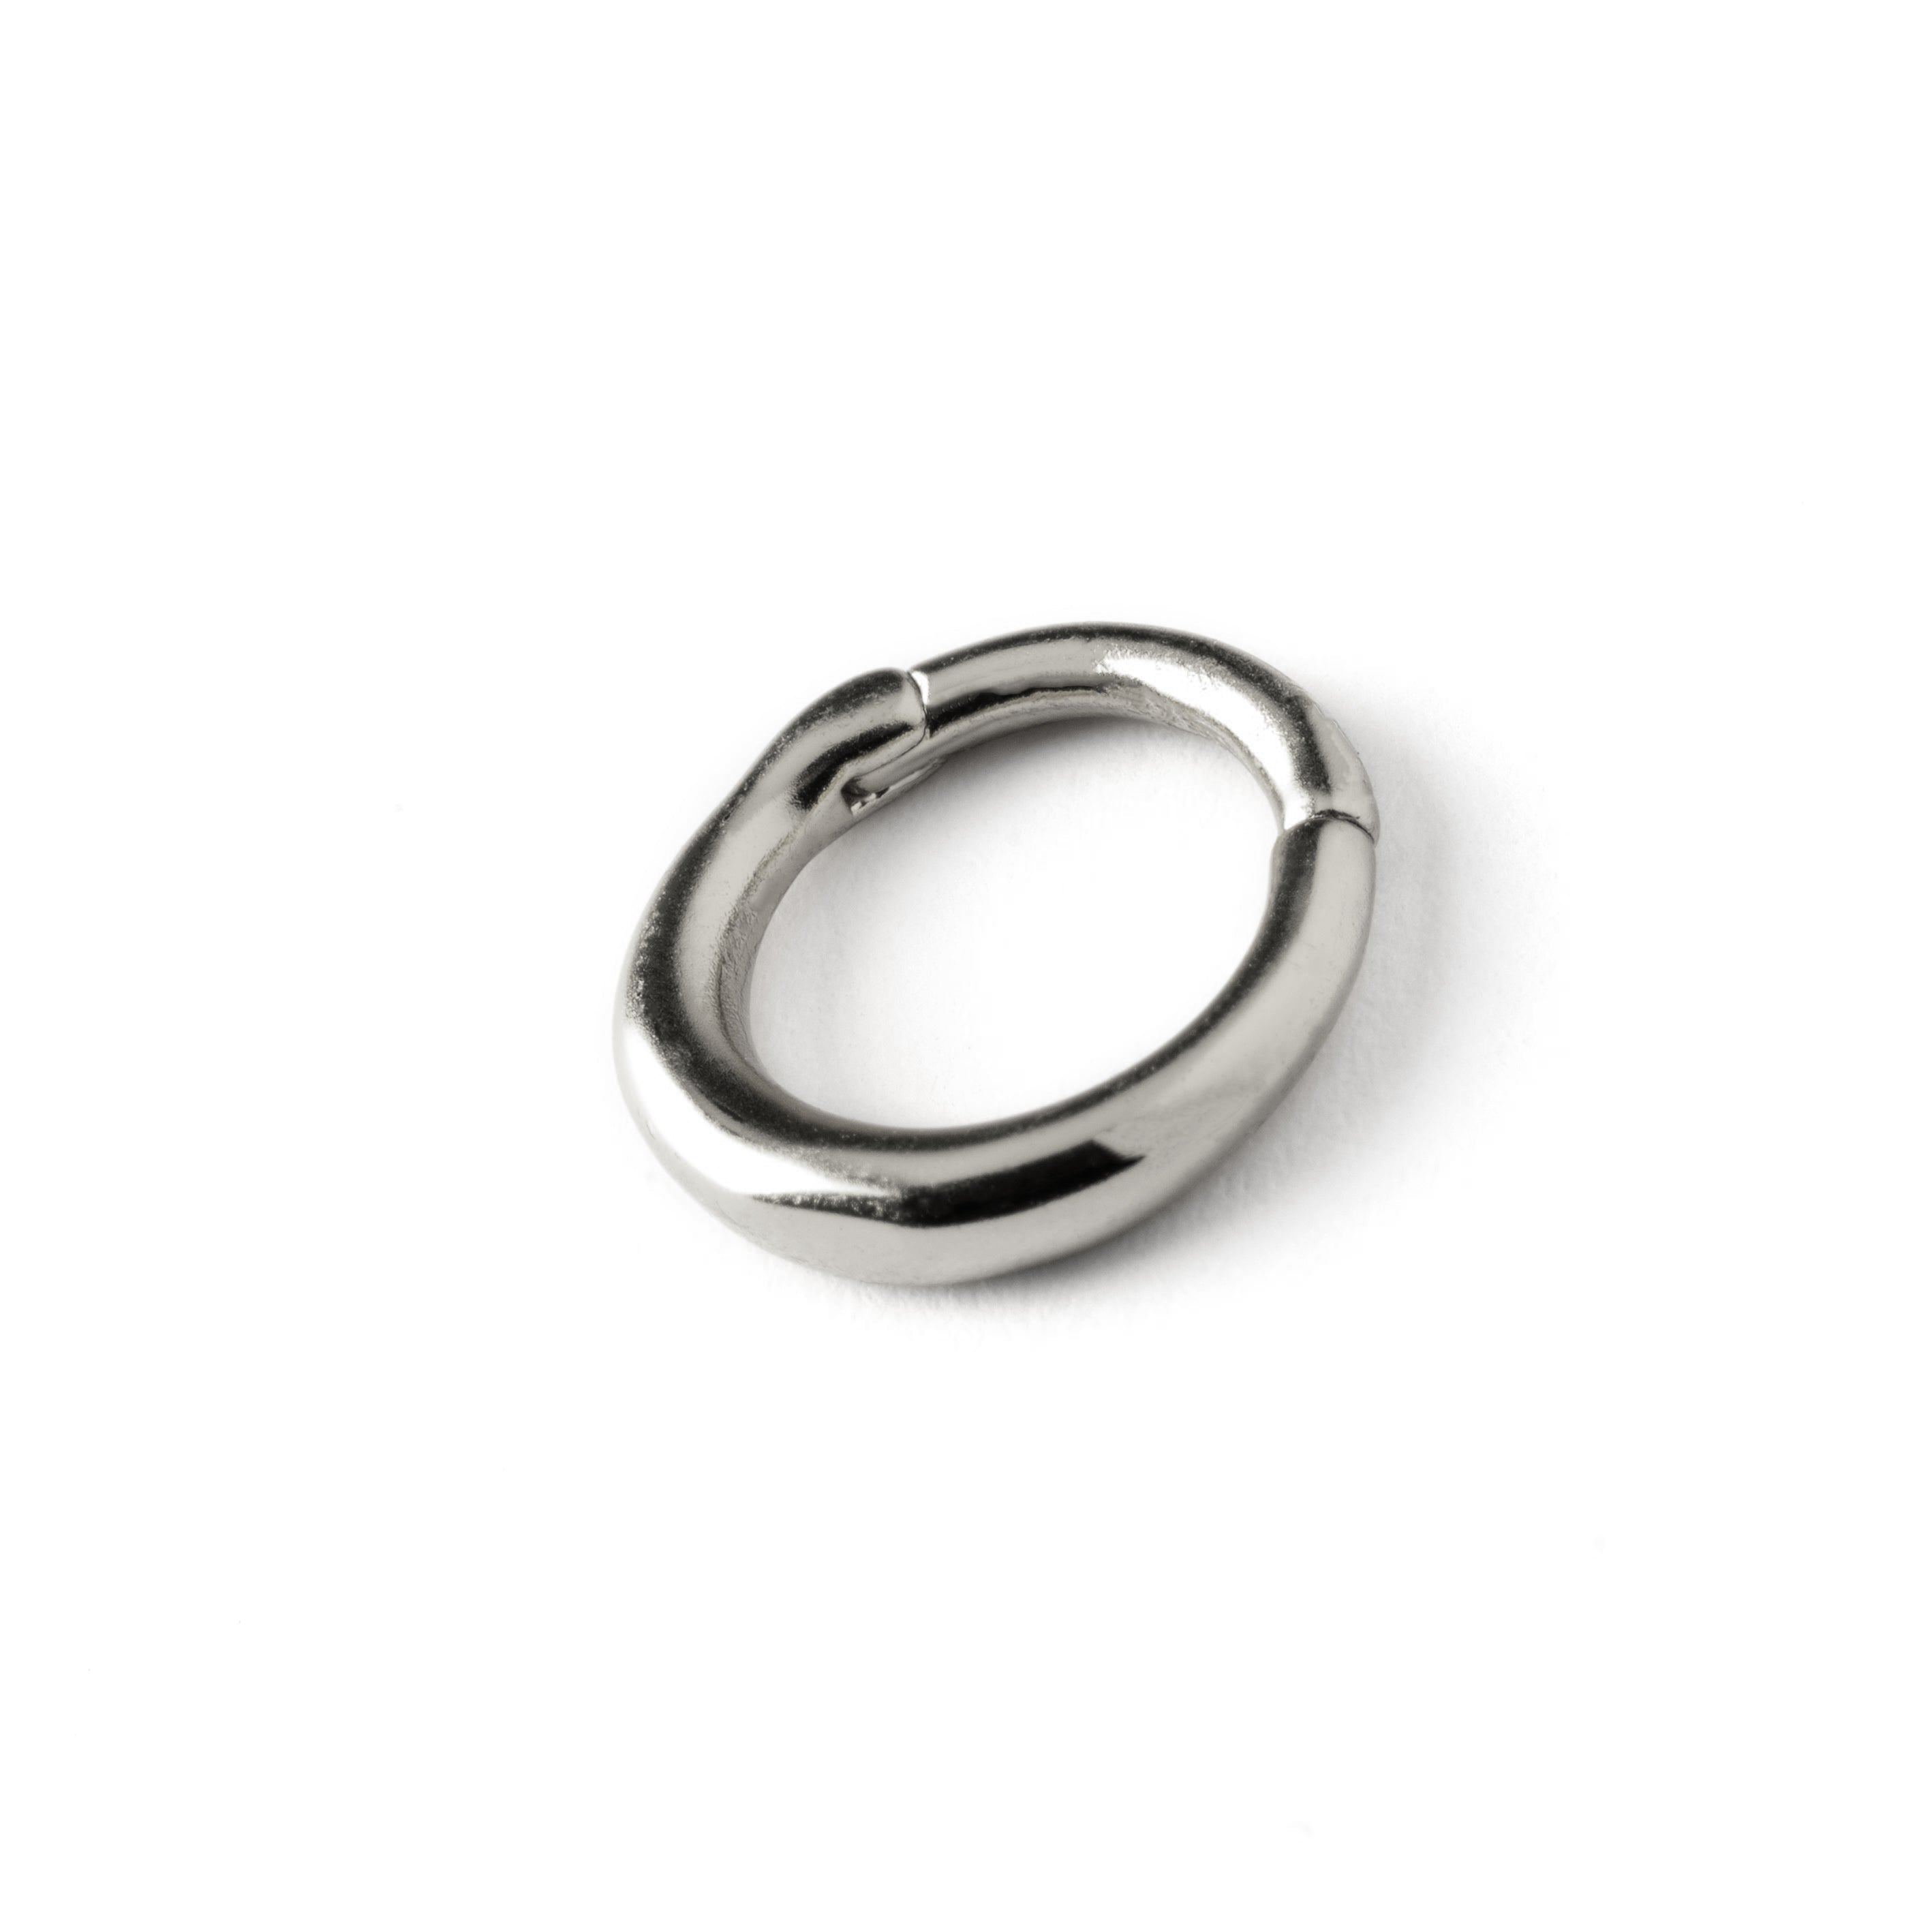 Raja surgical steel septum clicker ring right side view